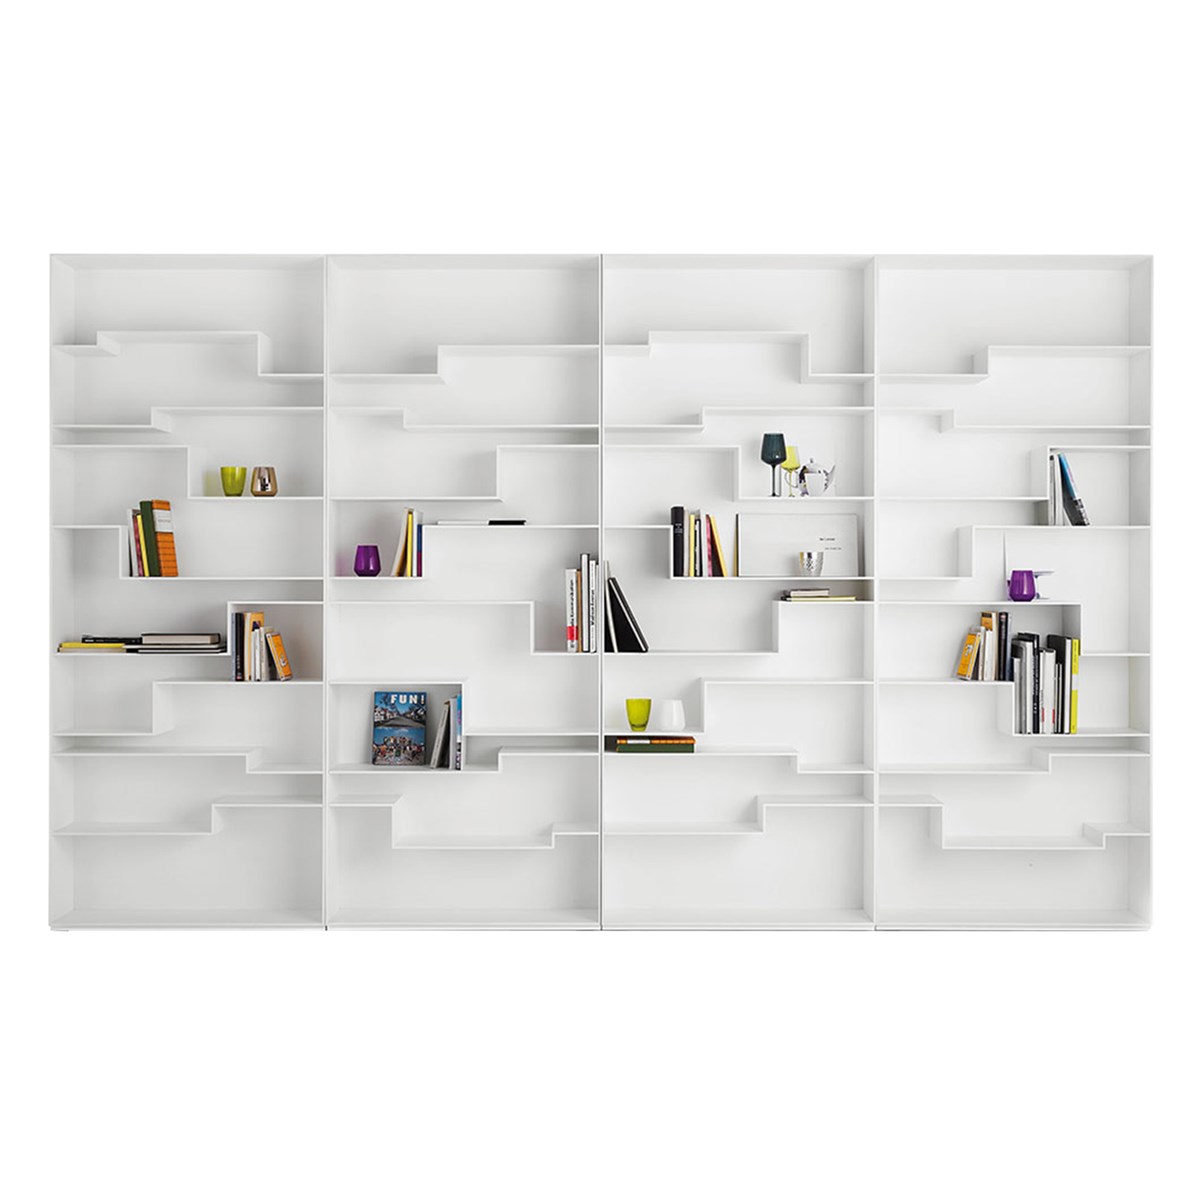 MDF-Italia-Neuland-Industriedesign-Melody-Shelving-System-Matisse-1